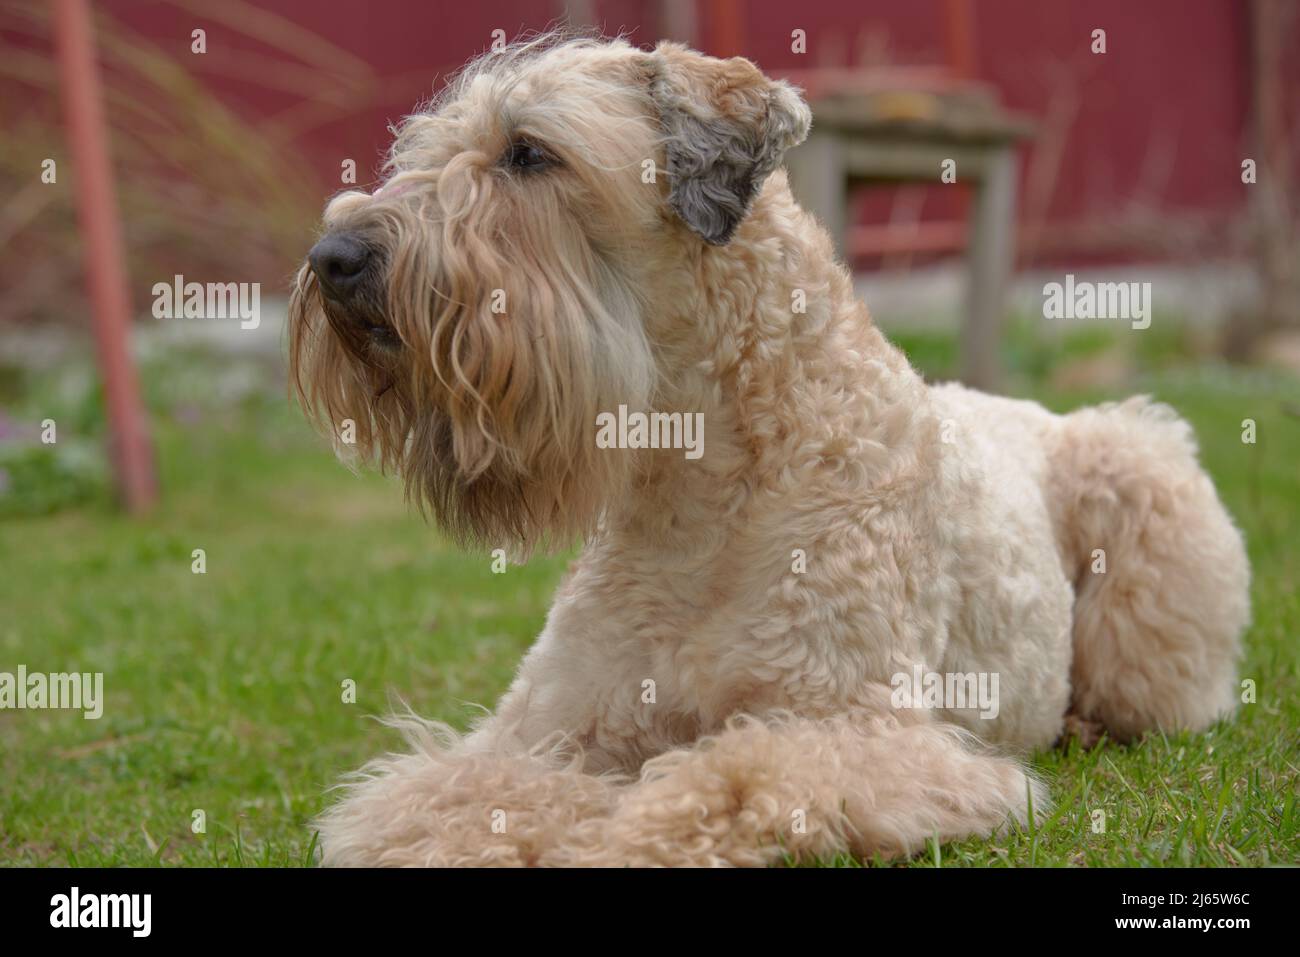 Irish soft coated wheaten terrier. A golden dog lies on a green lawn and looks intently into the distance. Stock Photo